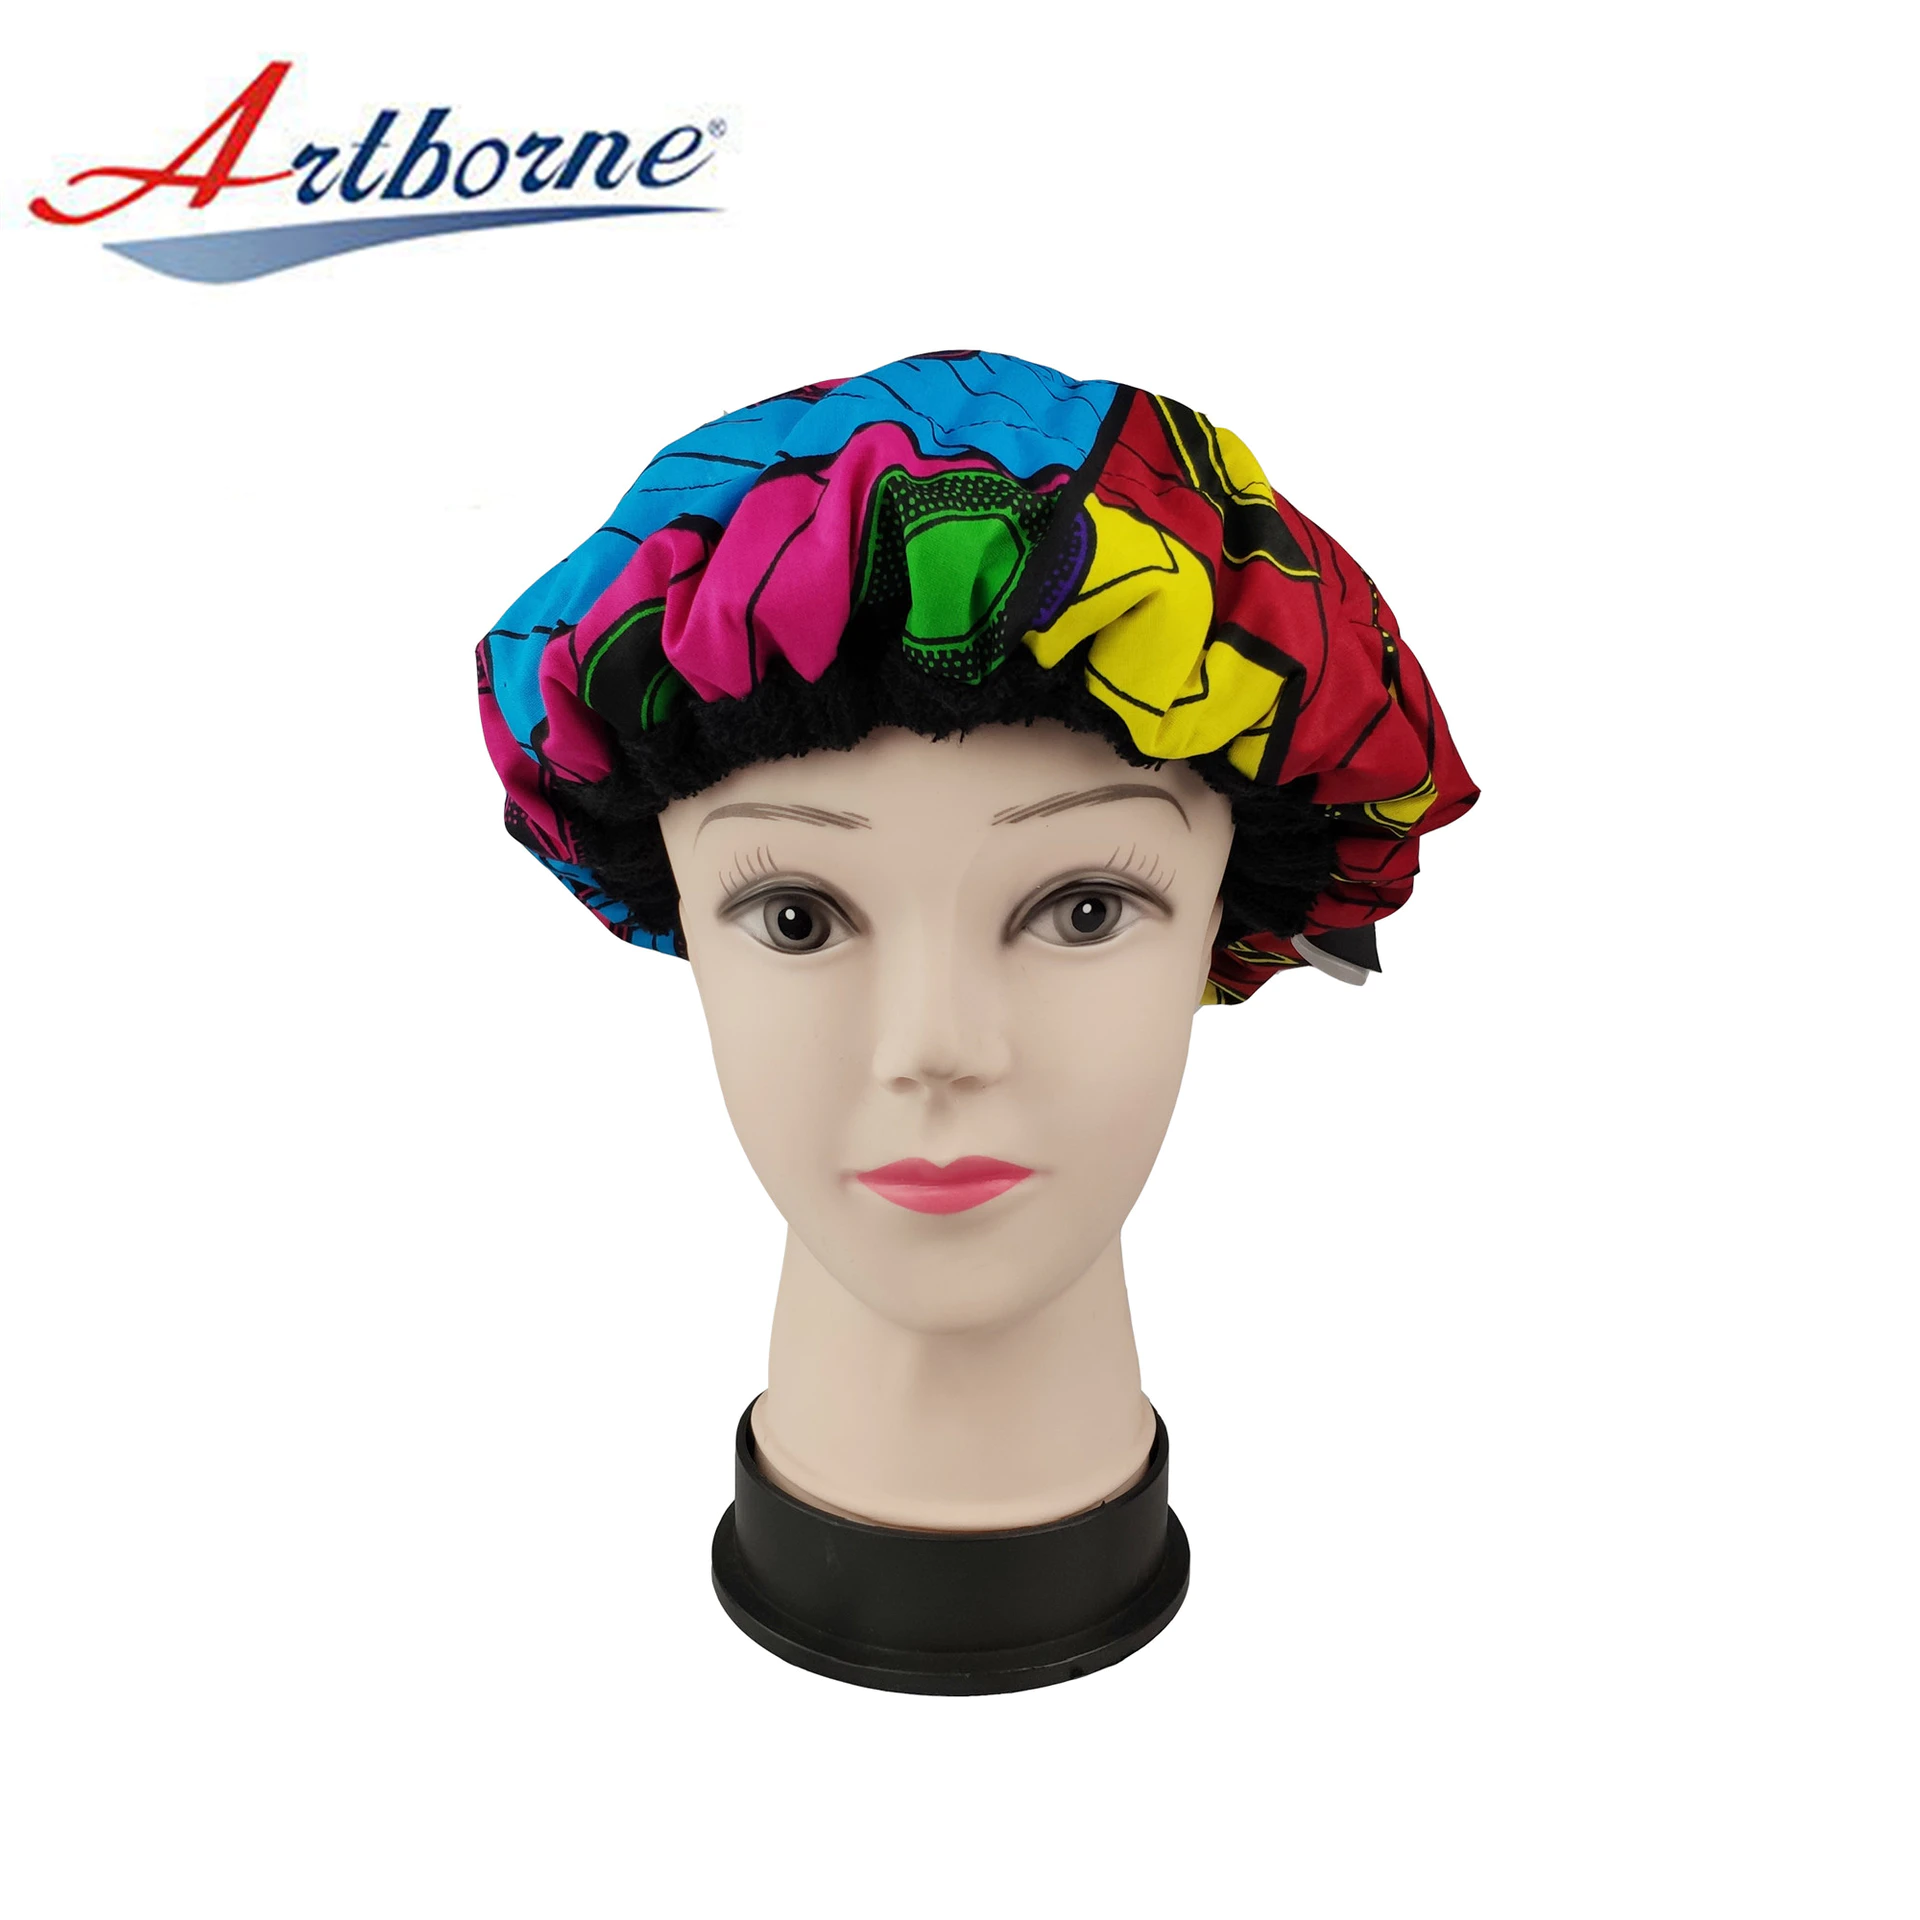 Artborne wholesale hot head thermal hair cap for business for women-33